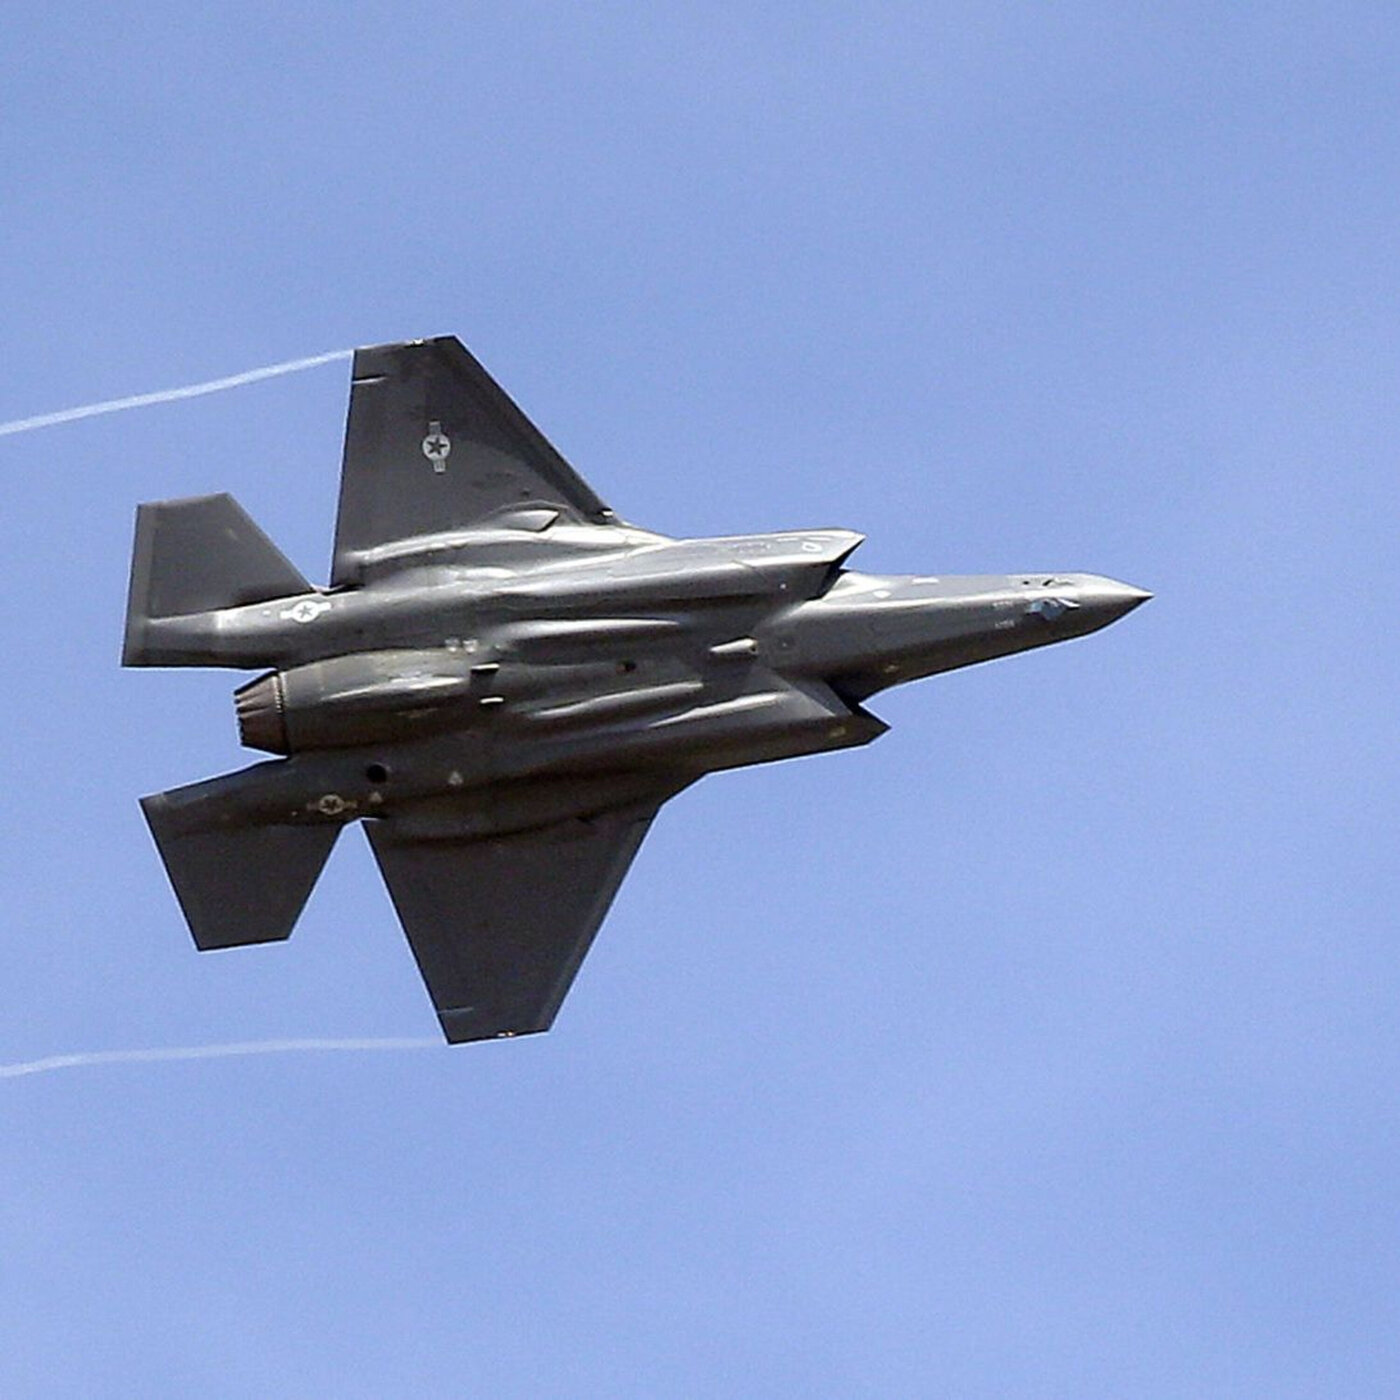 Take the F-35 jet test before it lands in Madison